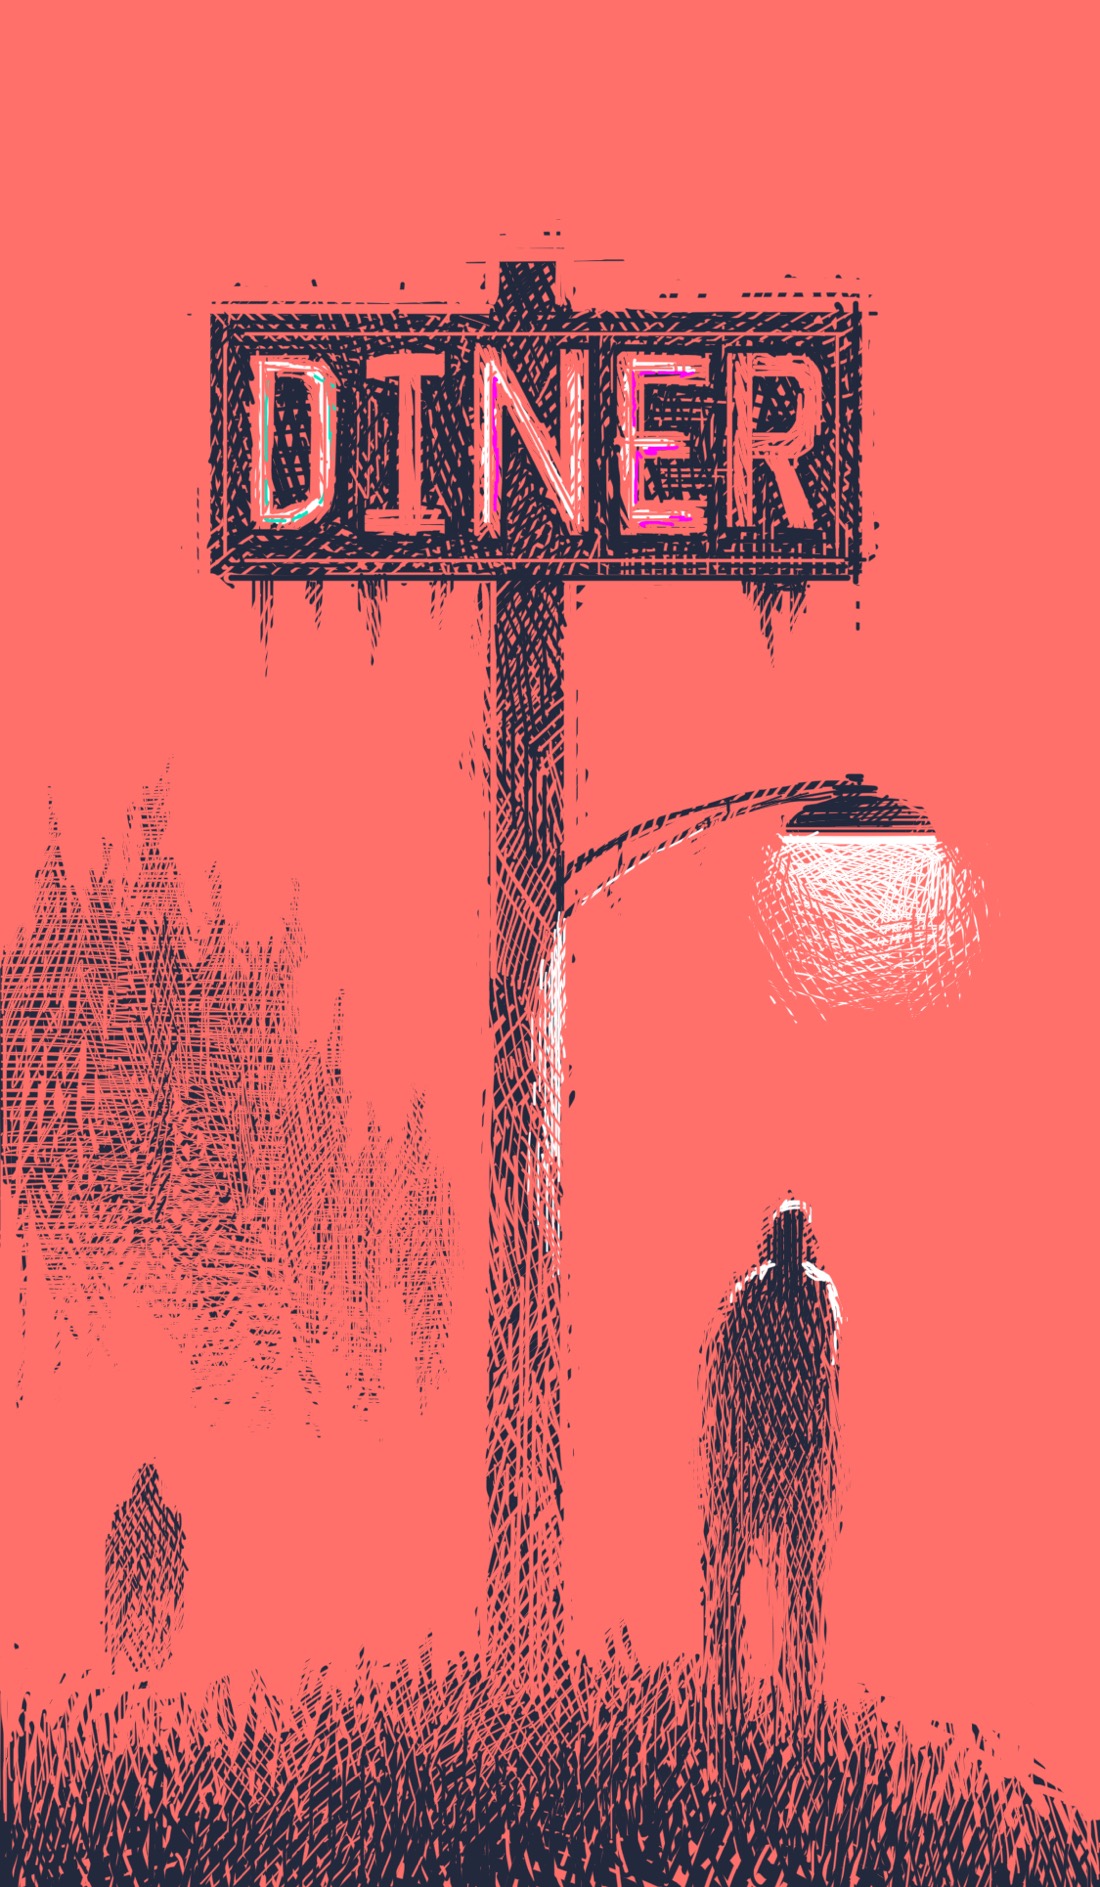 A tall sign—the size of a two-story building—out in the middle of nowhere with "diner" written on it. Some of the letters are dim, neon bulbs; others aren't lit at all. Also affixed to the sign pole is a street light, casting a dull light. The atmosphere seems to be a wet, foggy day. A figure stands under the street light, perhaps waiting for someone. Another figure approaches through the fog. Off in the distance is a dim, barely visible tree line, suggesting a forest.